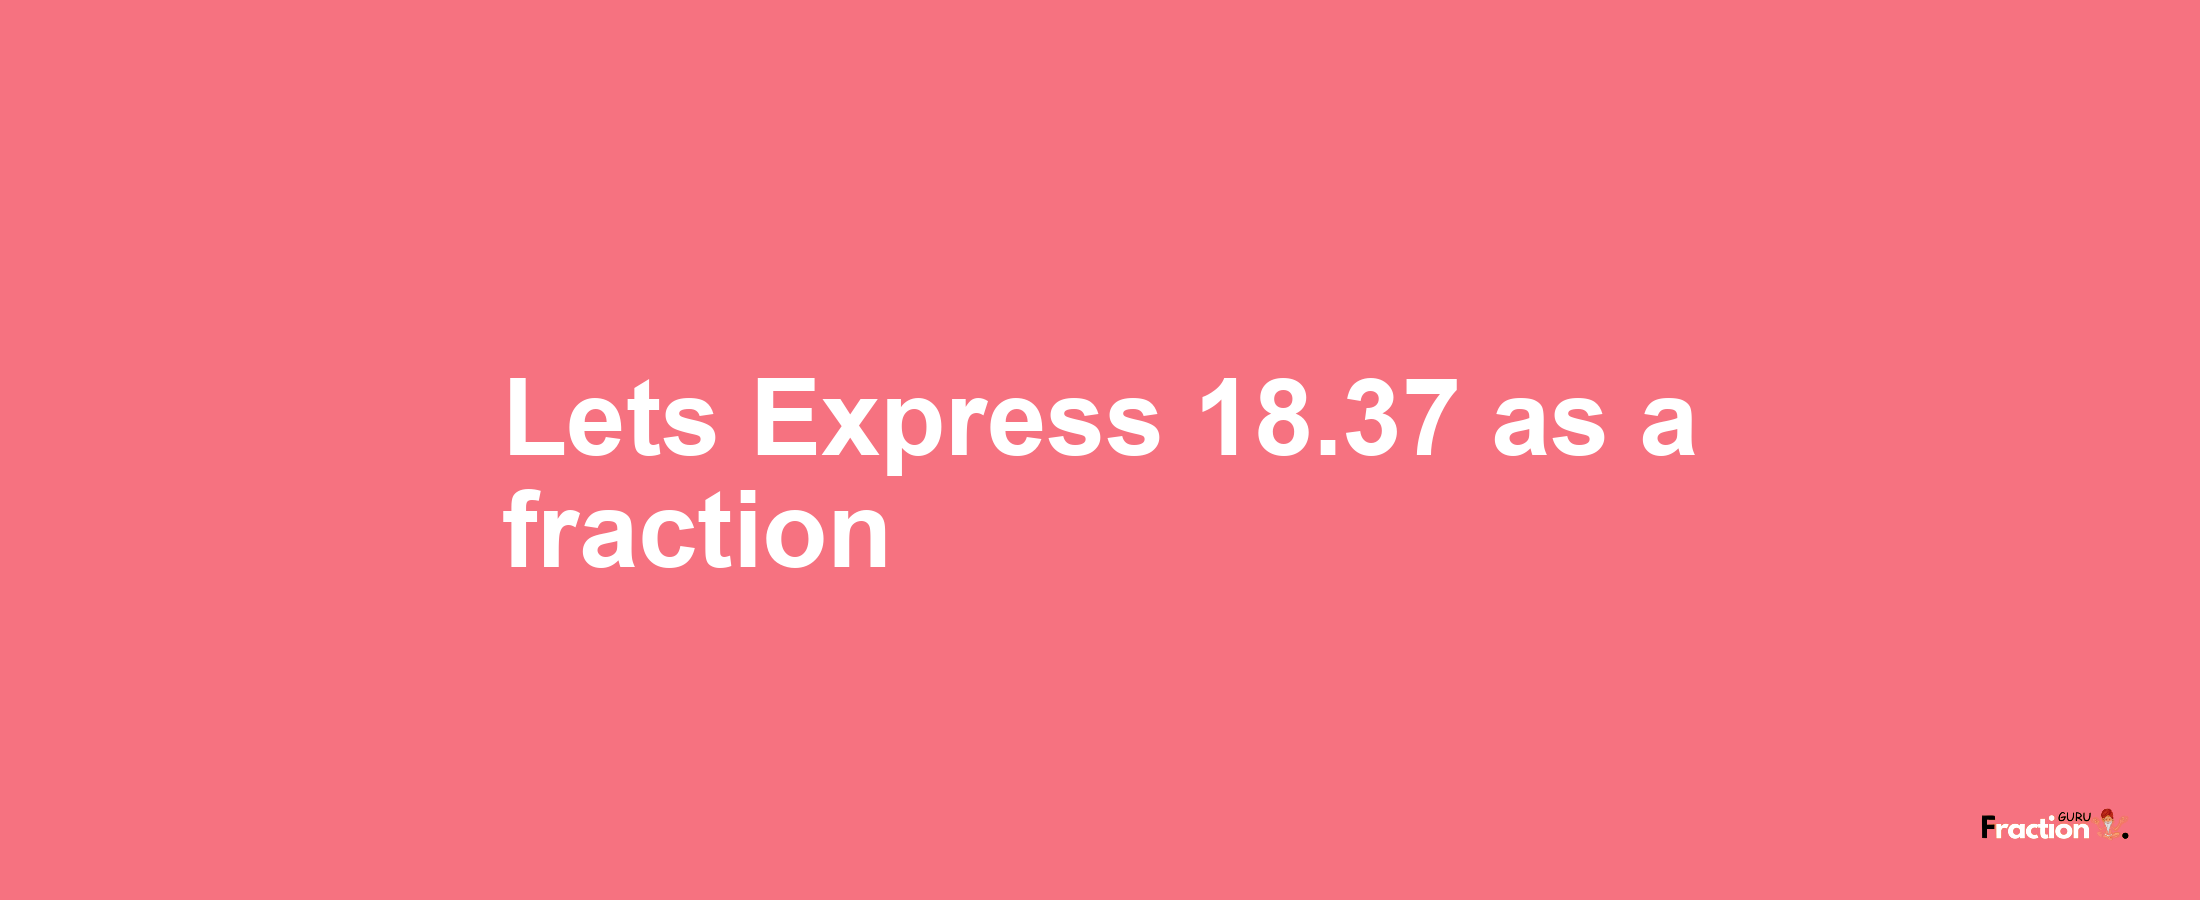 Lets Express 18.37 as afraction